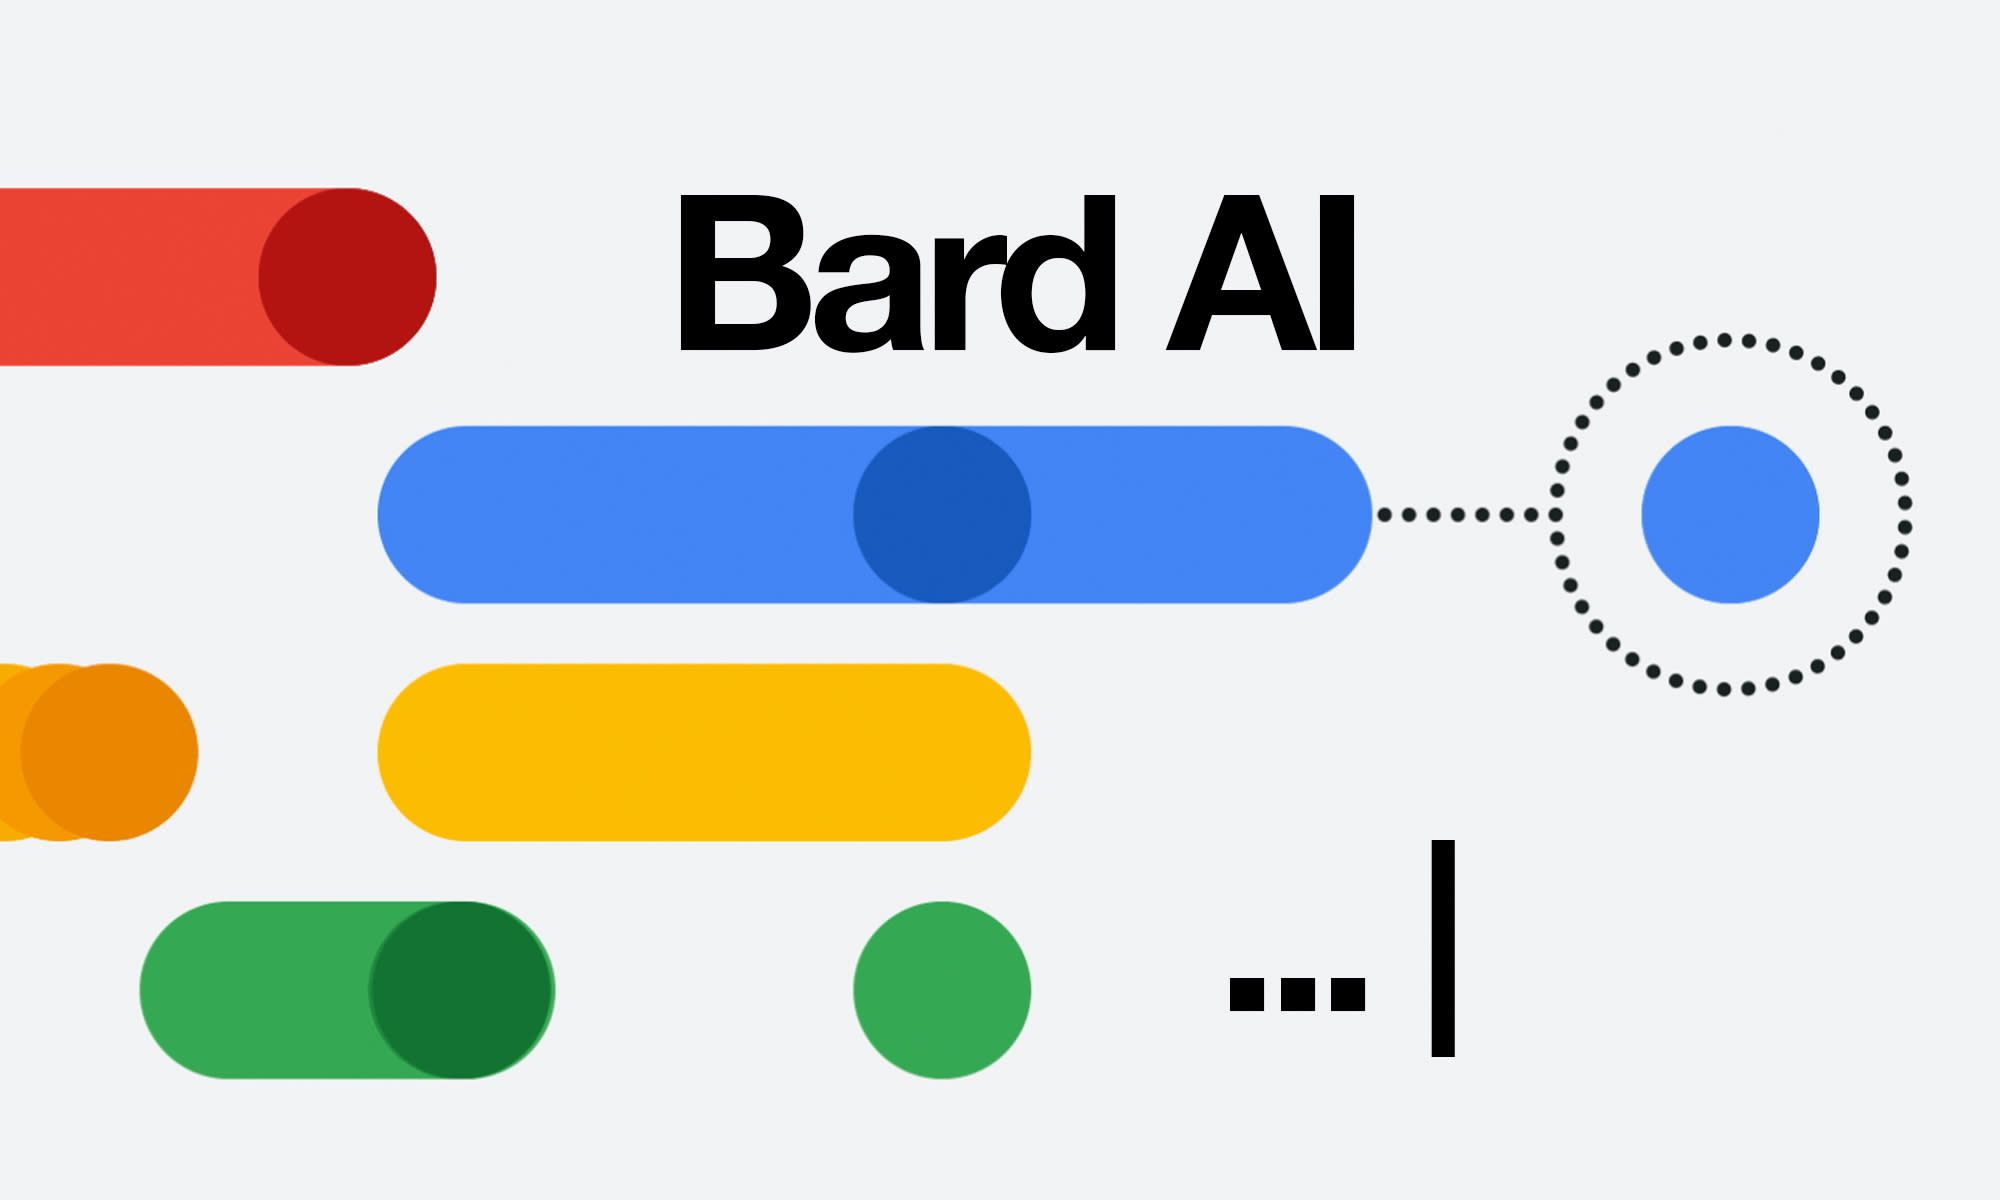 Google is opening up access to Bard and awaiting feedback from its users